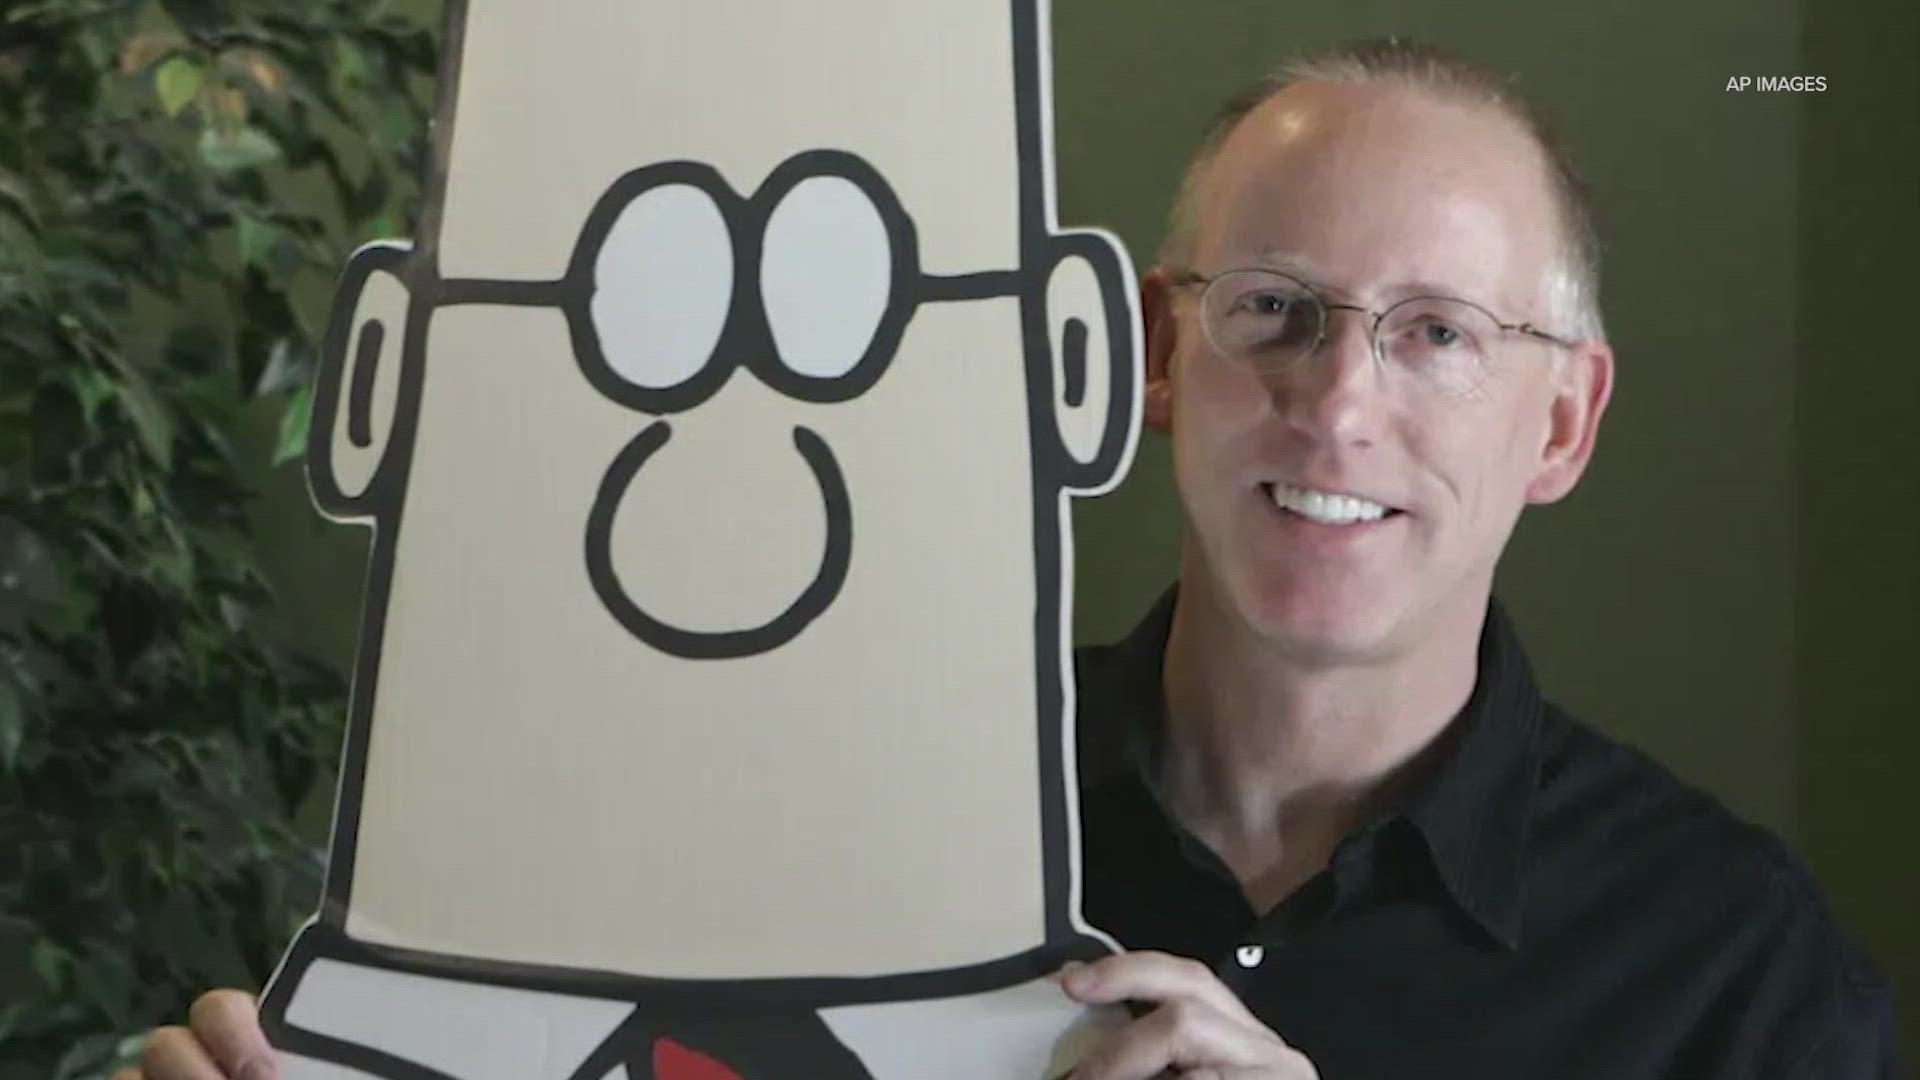 During a rant on YouTube, Scott Adams' comments were denounced by media officials as racist, hateful and discriminatory.